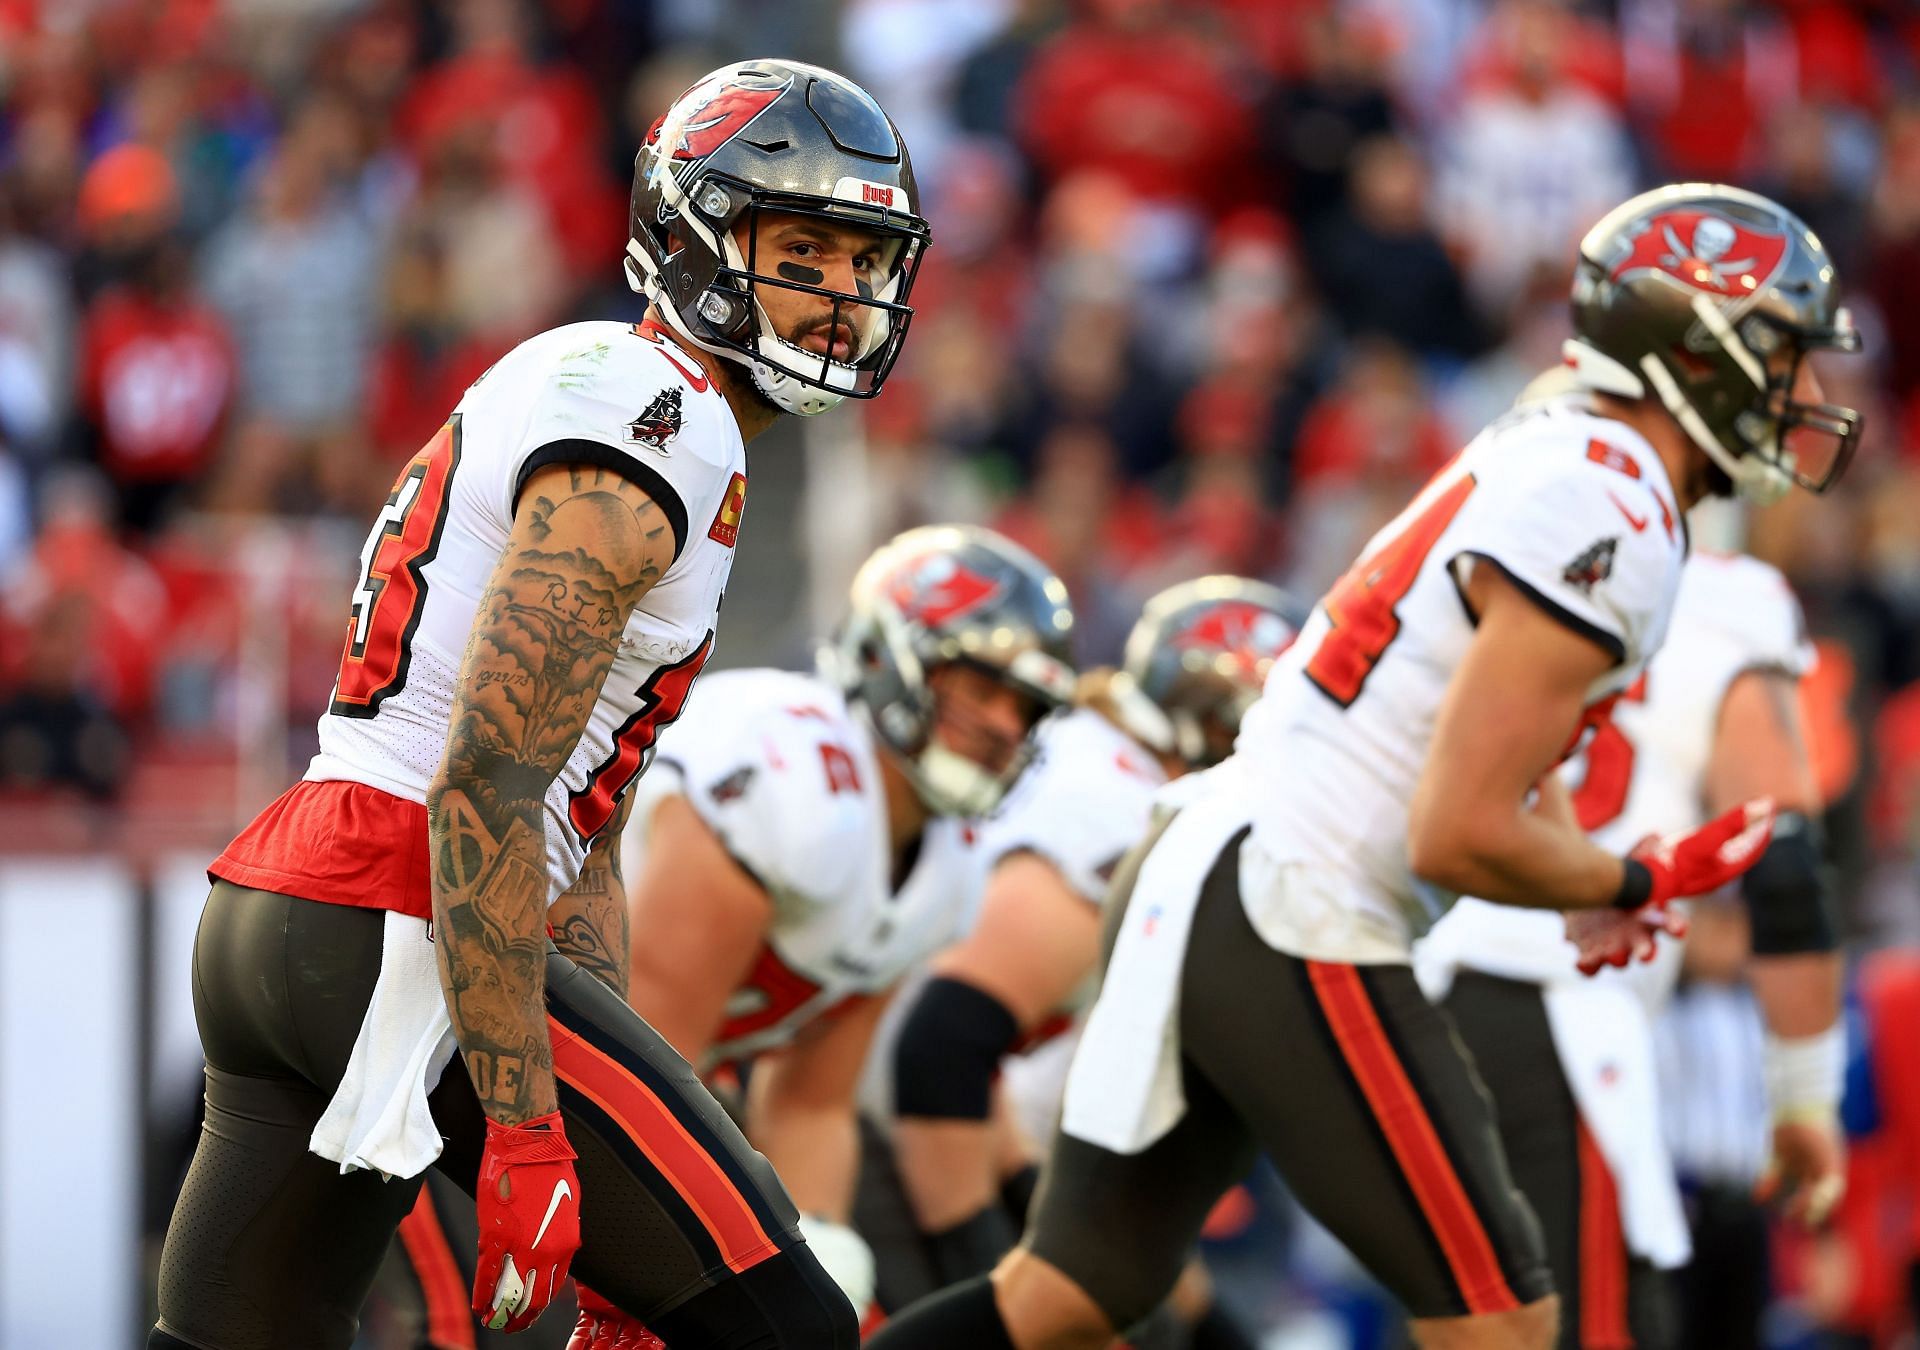 The Tampa Bay Buccaneers are still a contender